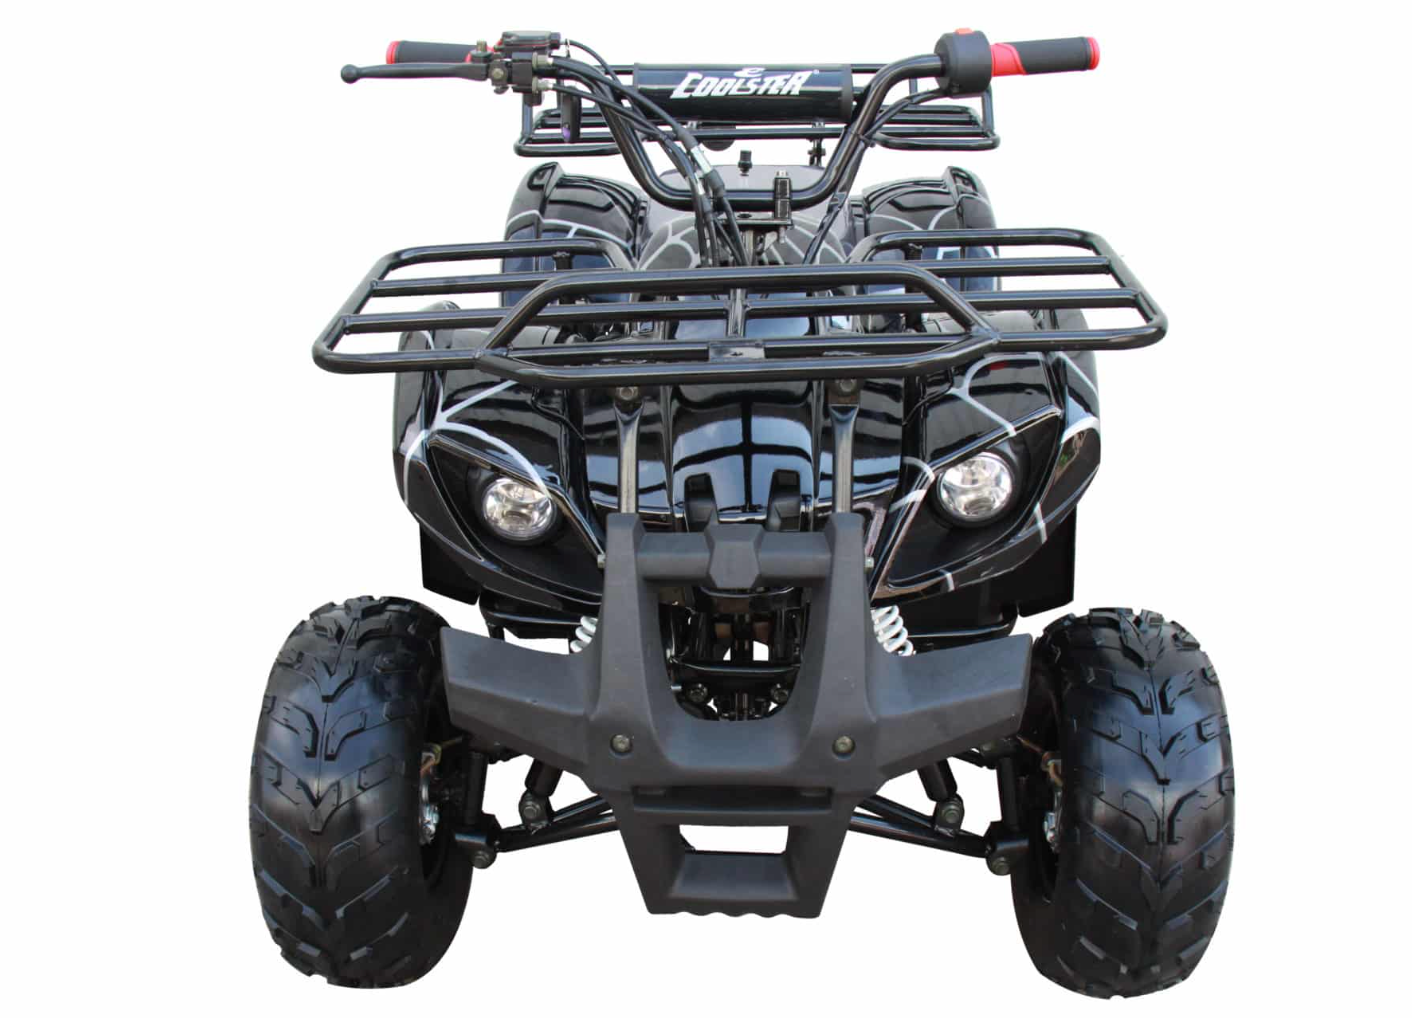 Coolster 3125R 125cc Off Road Mid Four Wheeler Gas ATV